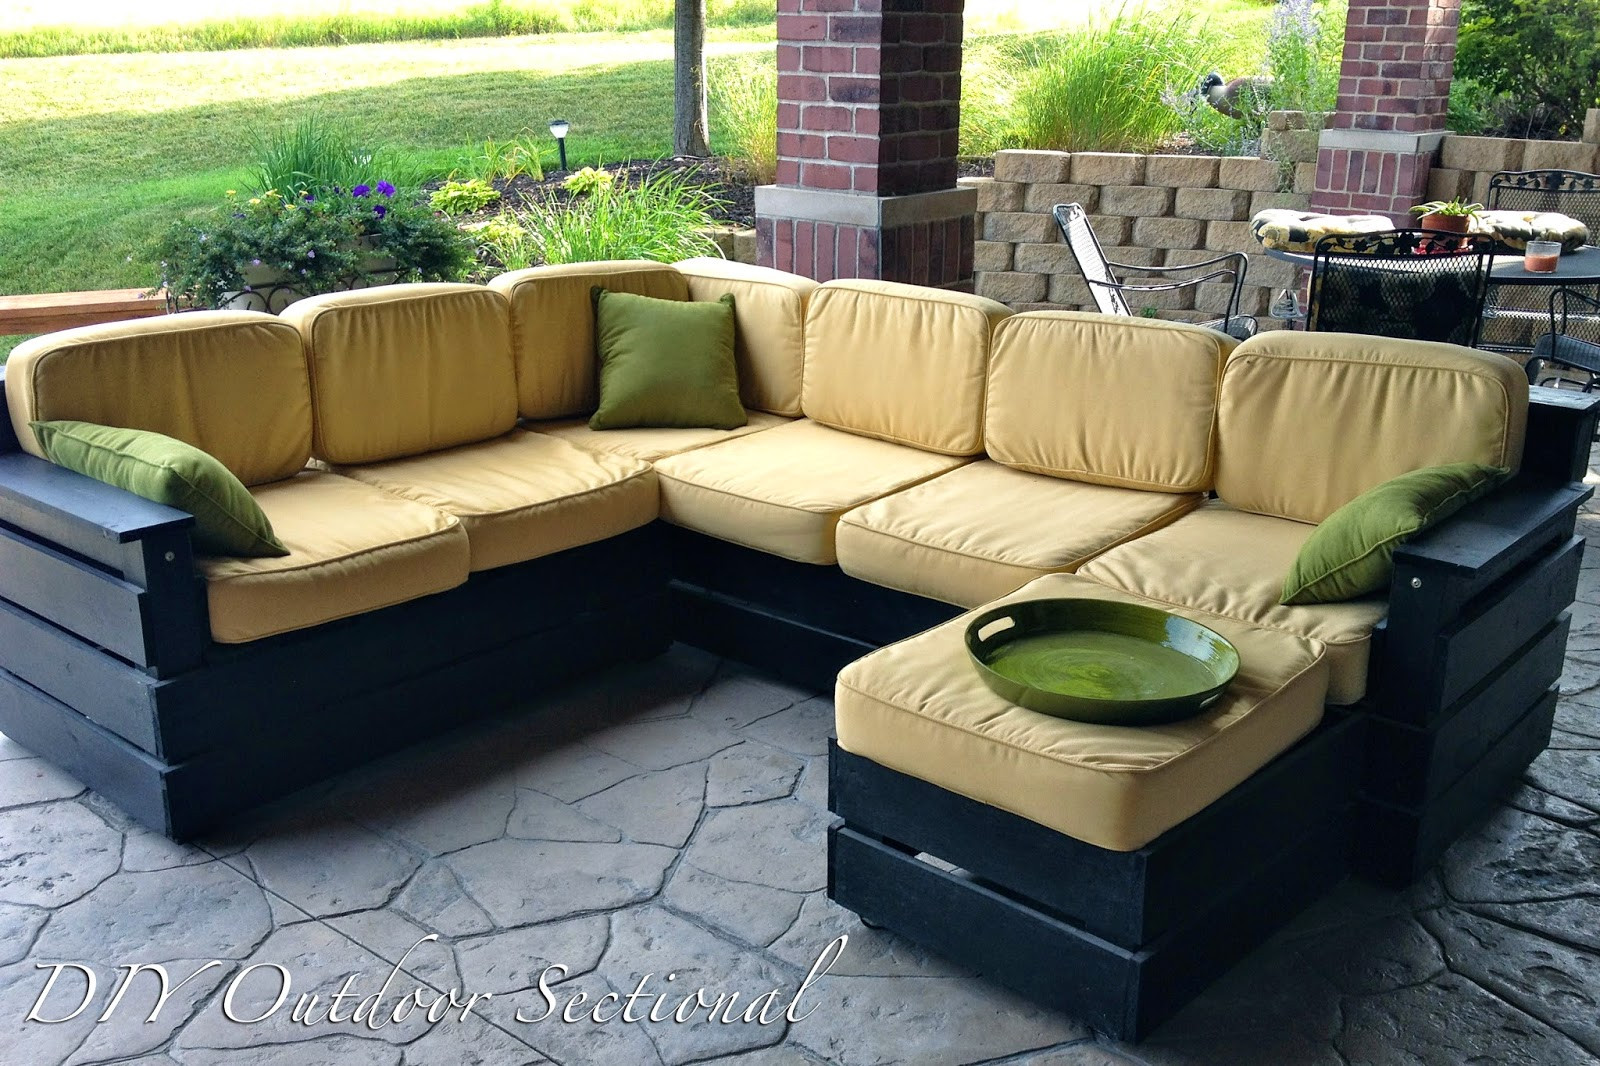 Outdoor Sectional DIY
 DIY Why Spend More DIY Outdoor Sectional